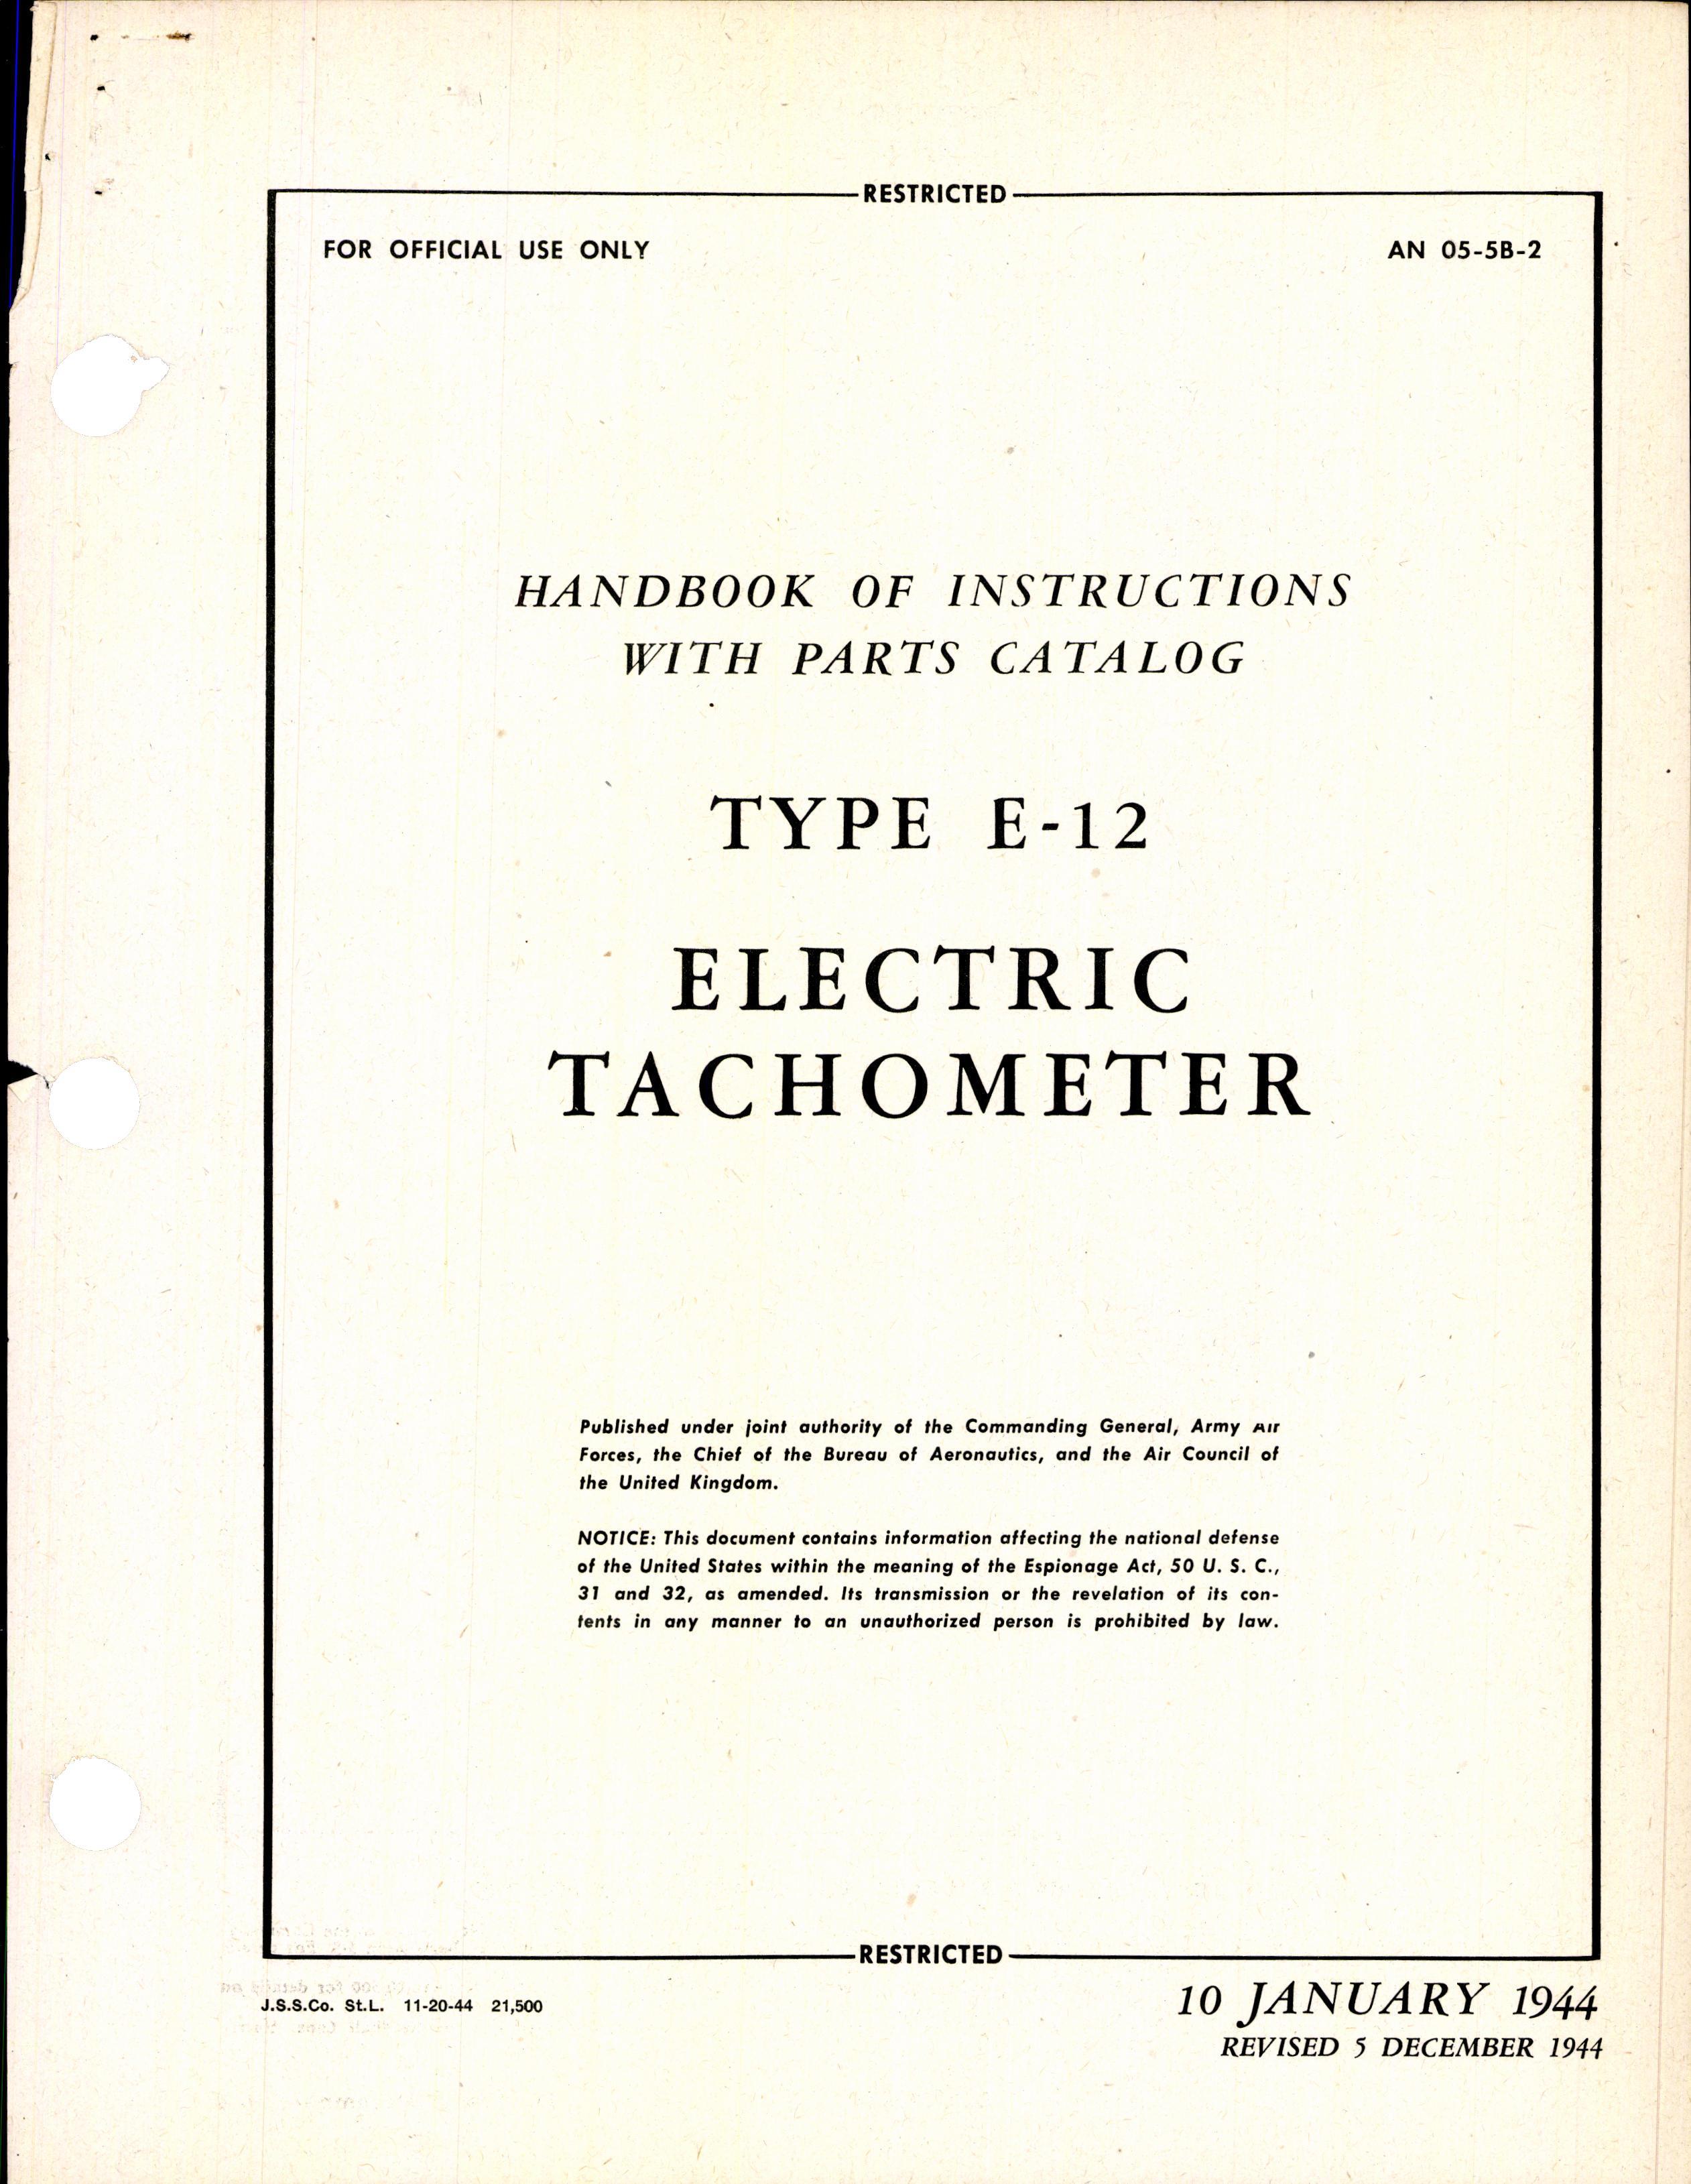 Sample page 3 from AirCorps Library document: Instructions with Parts Catalog for Type E-12 Electric Tachometer